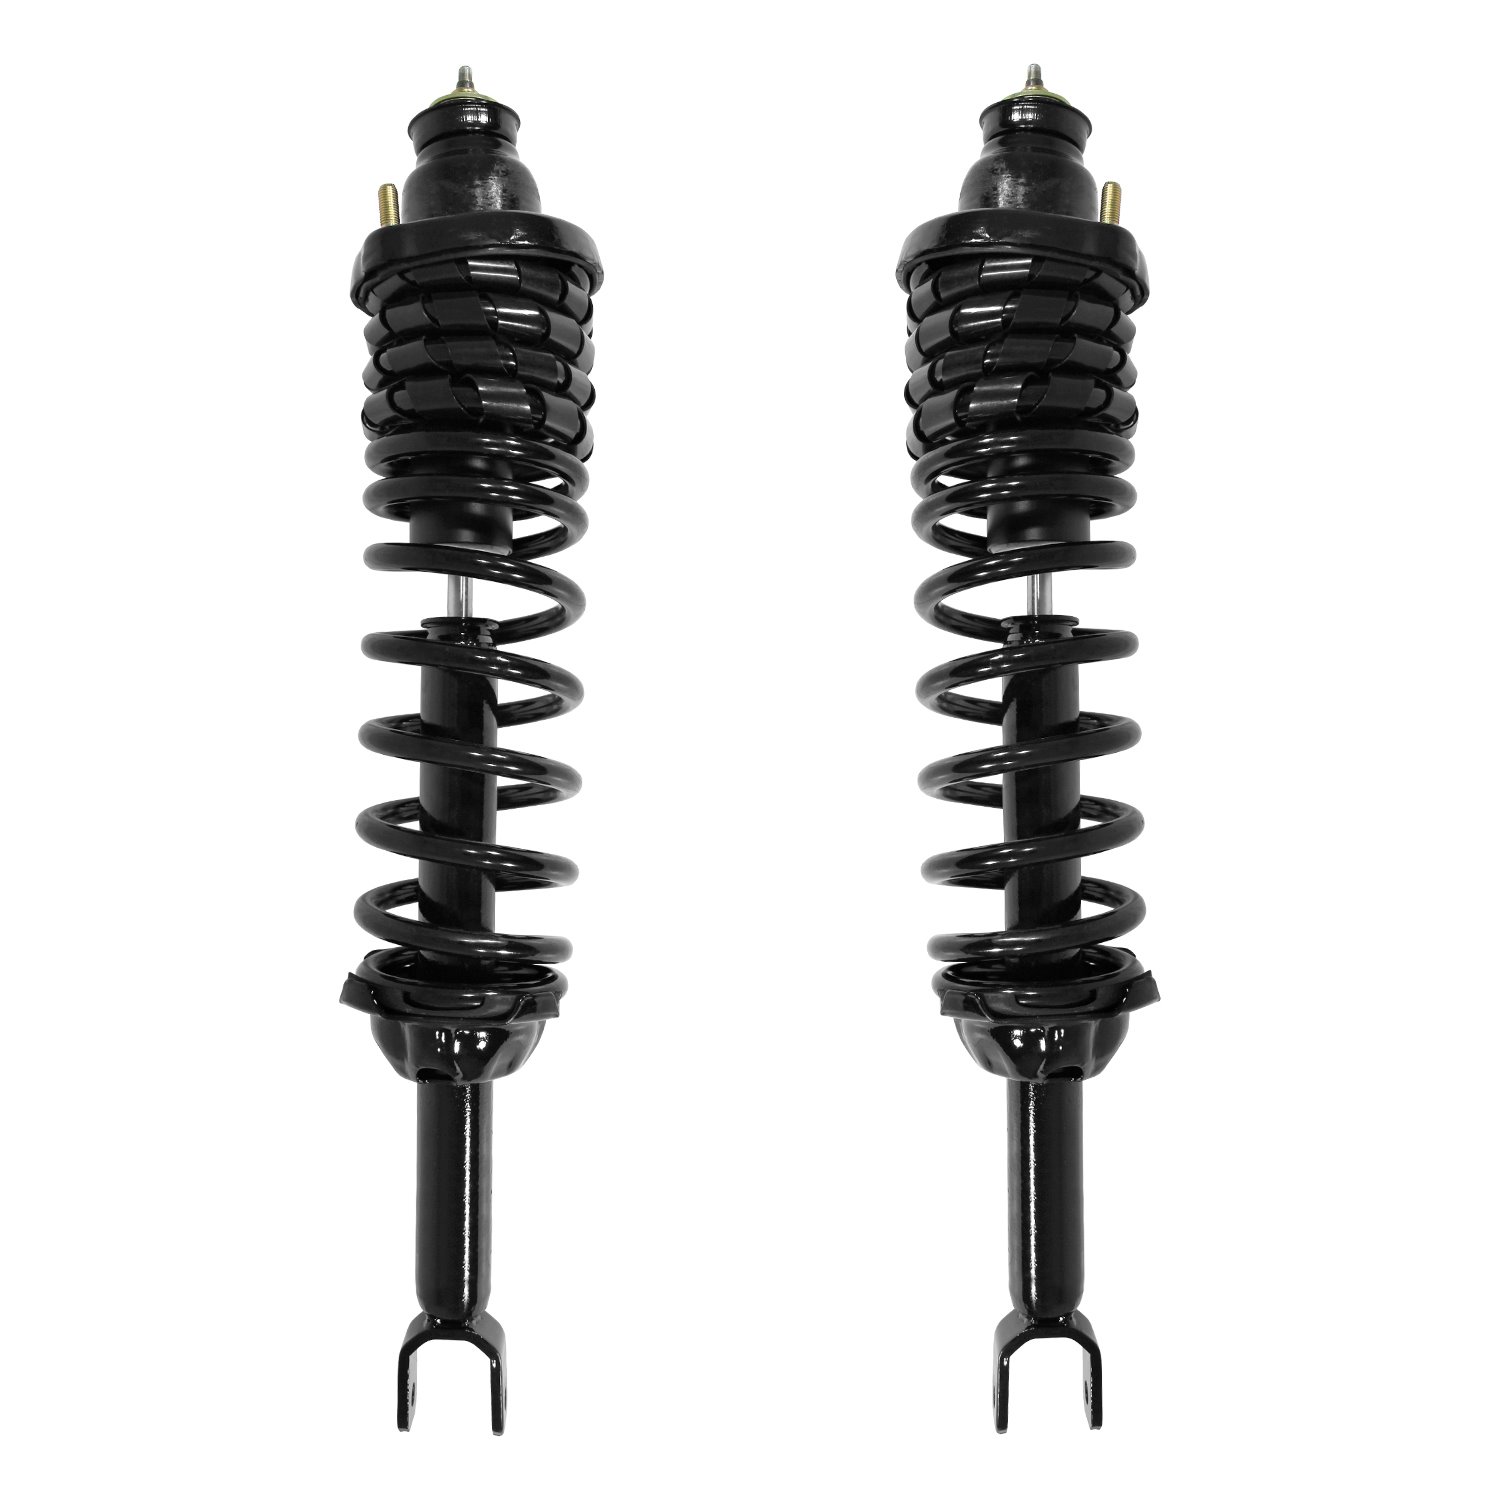 2-15151-15152-001 Suspension Strut & Coil Spring Assembly Set Fits Select Honda Accord